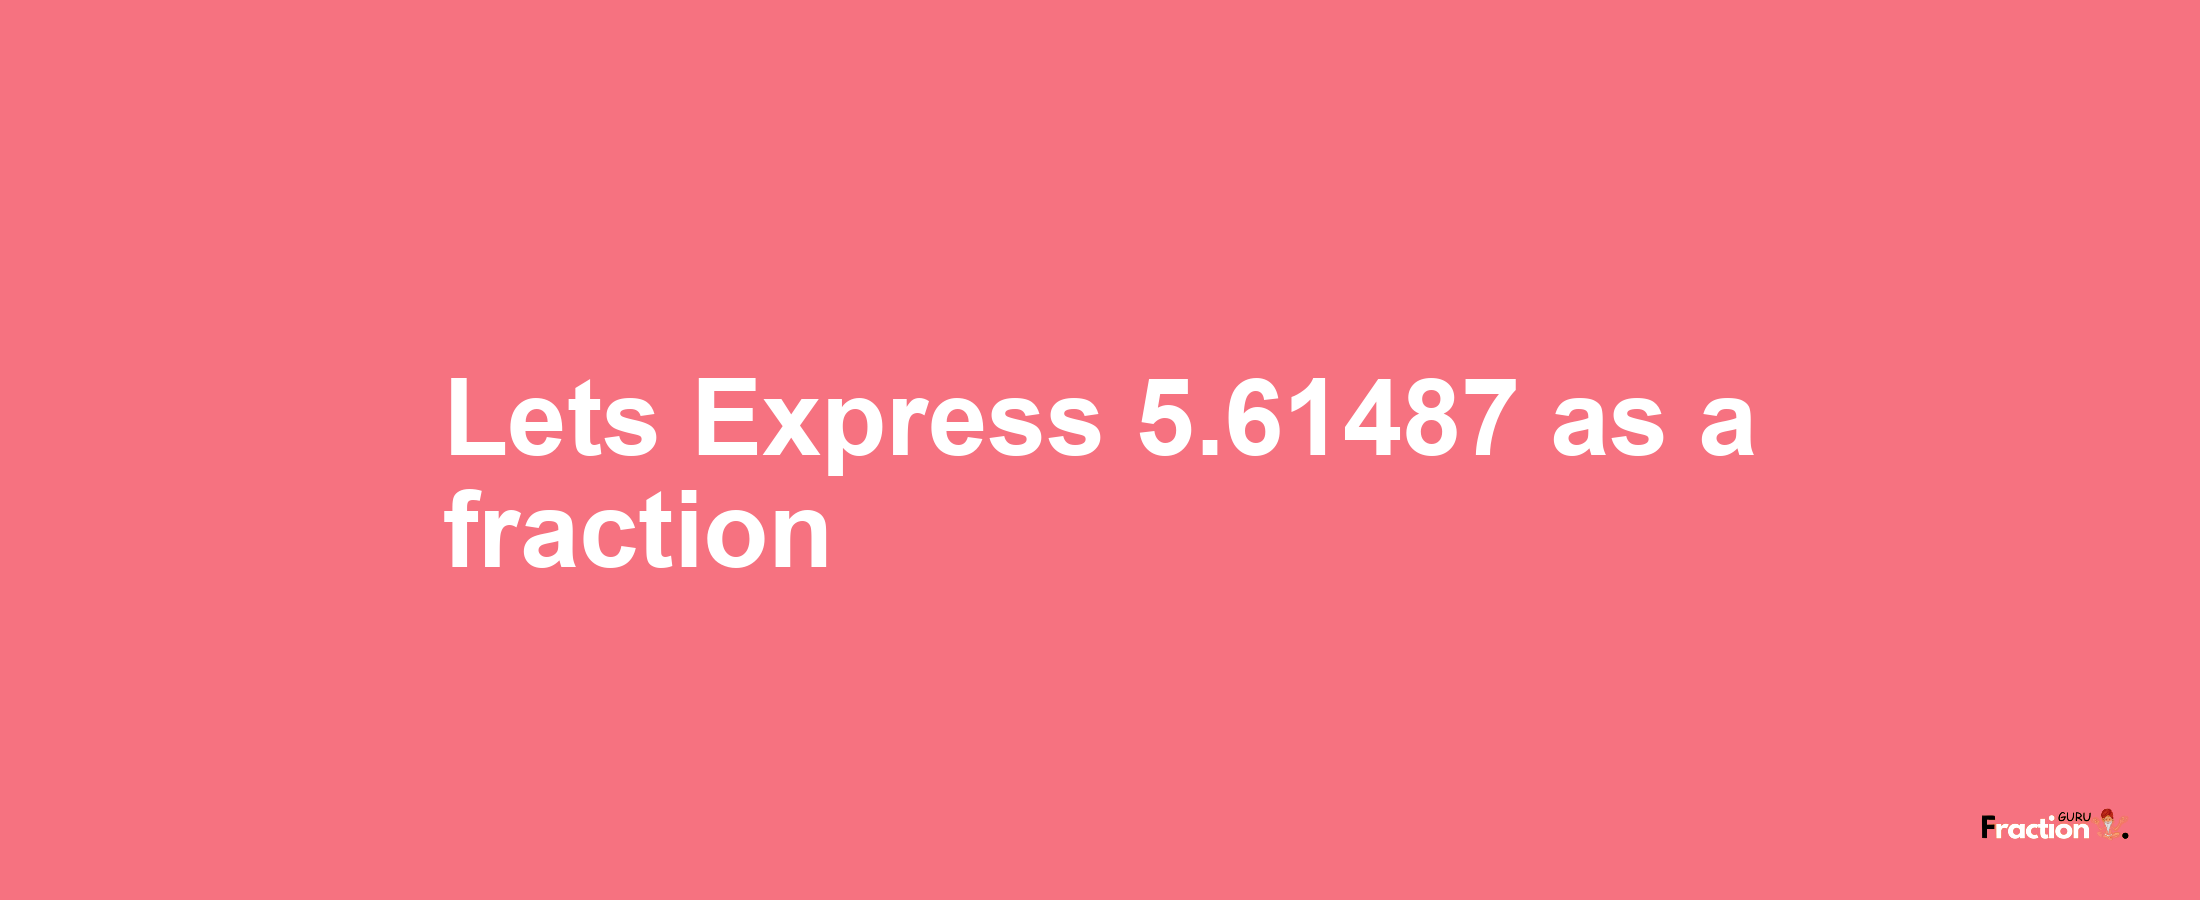 Lets Express 5.61487 as afraction